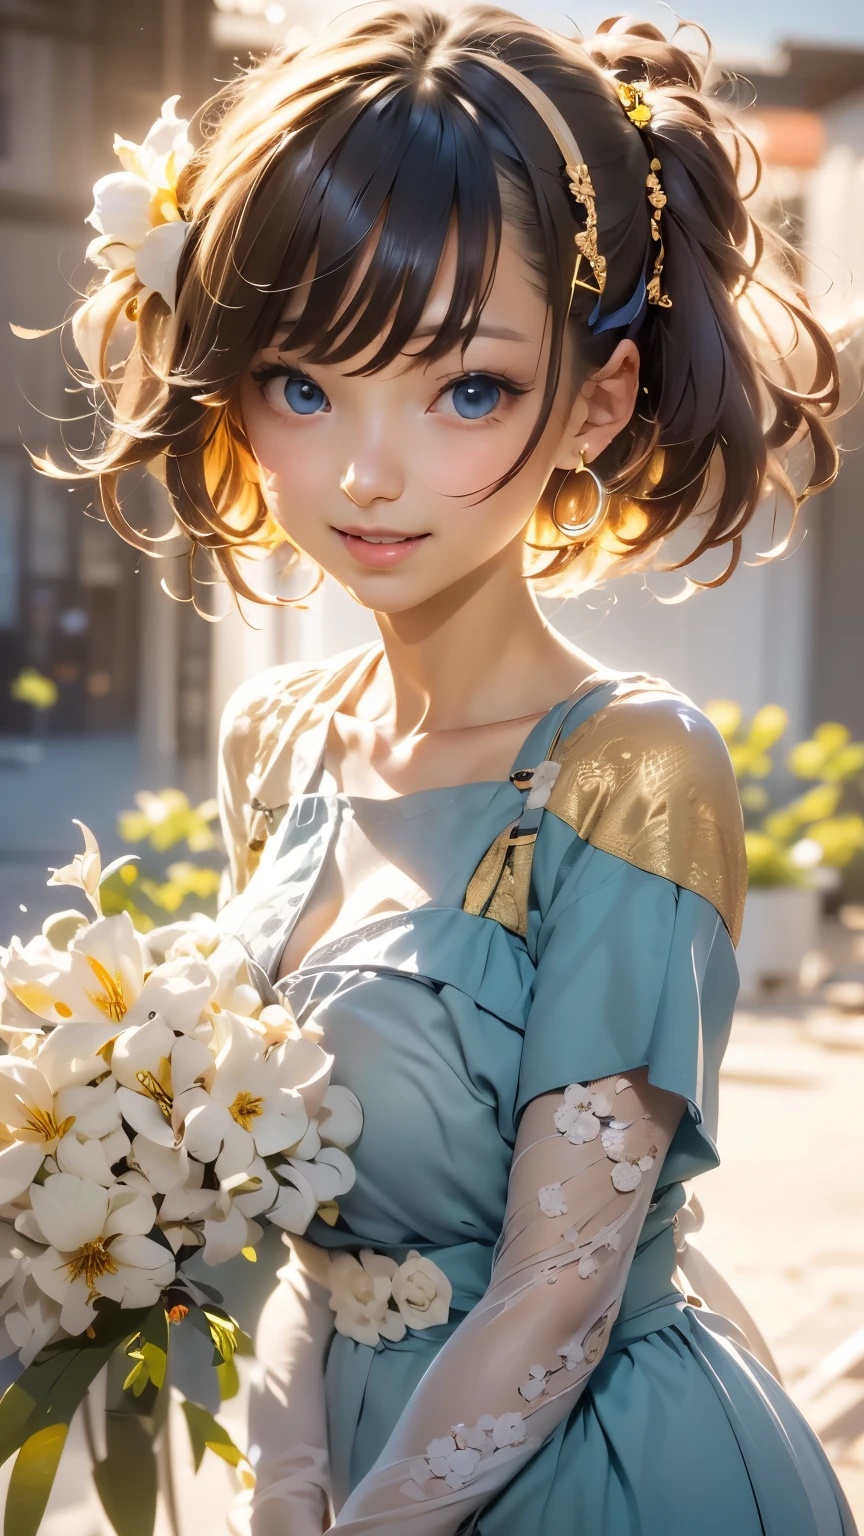 1 girl, Blue eyes. Full-length, holding a lily in her hand, short blue bell dress with yellow stripes, straps, and open shoulders. Blue eyes glow with happiness. Head tilted, short brown hair, graceful head, with a clear smile on her face, Chic interior - sunshine. Chara, a golden studio background, stands among white flowers. Brown hair, blunt bangs, hair between the eyes, parted bangs, long eyelashes, earrings, slight smile, Realism, Surrealism, Art Deco, chiaroscuro, backlighting, masterpiece, anatomically correct, super detail, excellent detail, award-winning, best quality, 1080P, HD